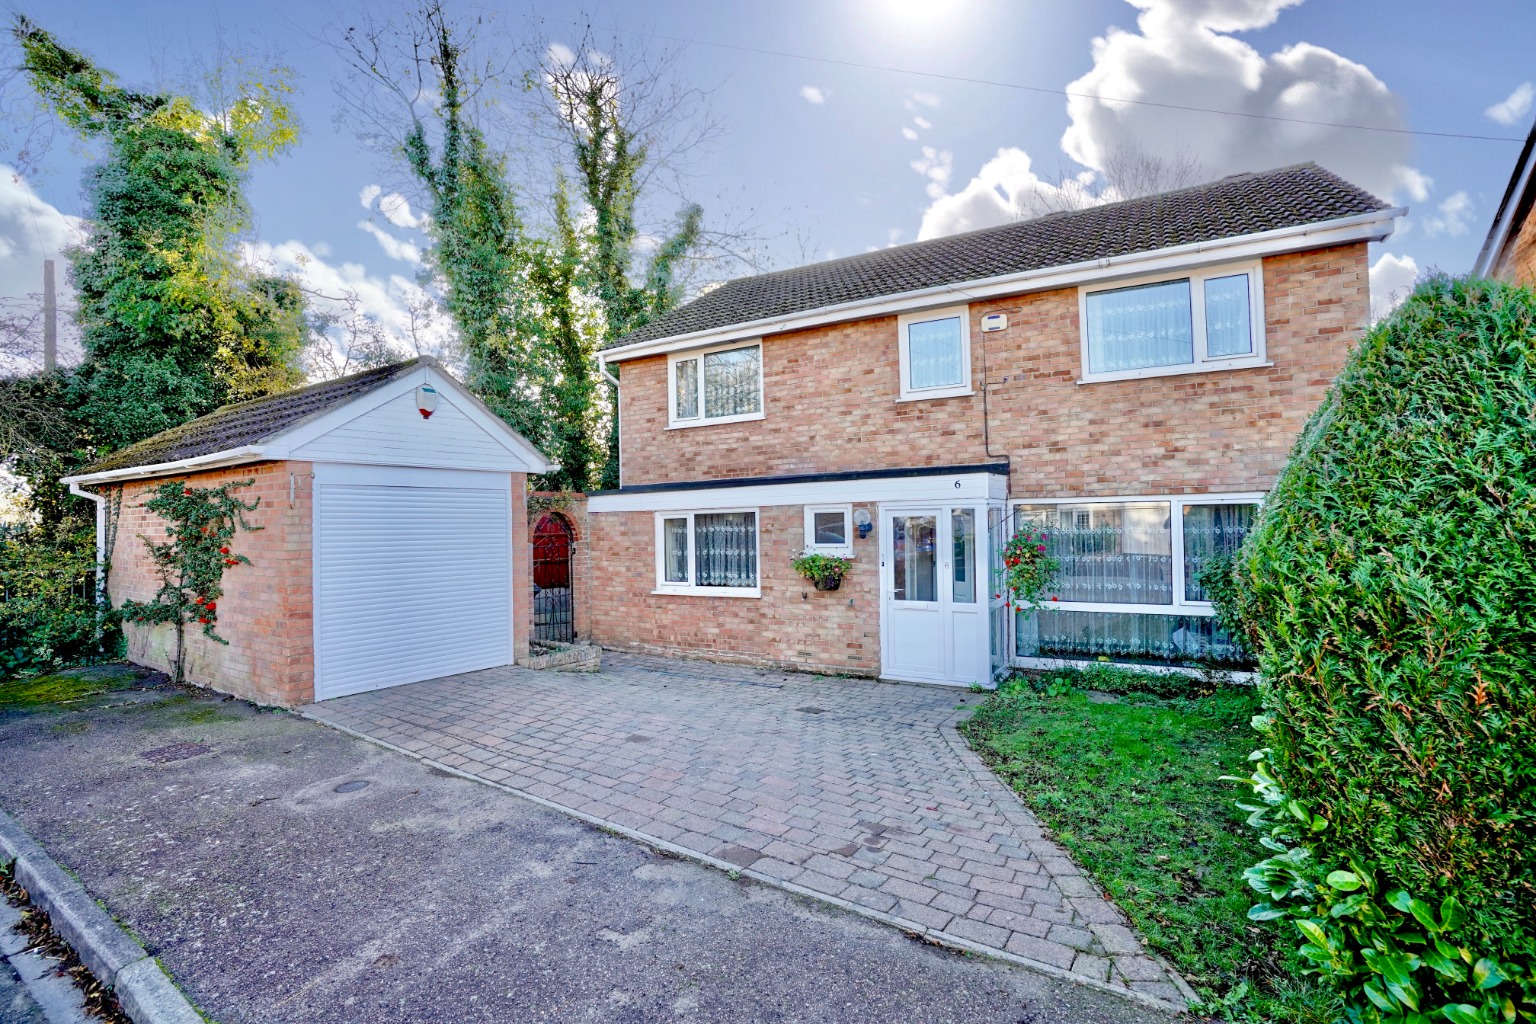 **GUIDE PRICE £450,000 - £475,000** Set in a quiet position in Eaton Socon is this spacious five bedroom family home. The property has ample parking and a single garage to the front and a spacious garden to the rear.